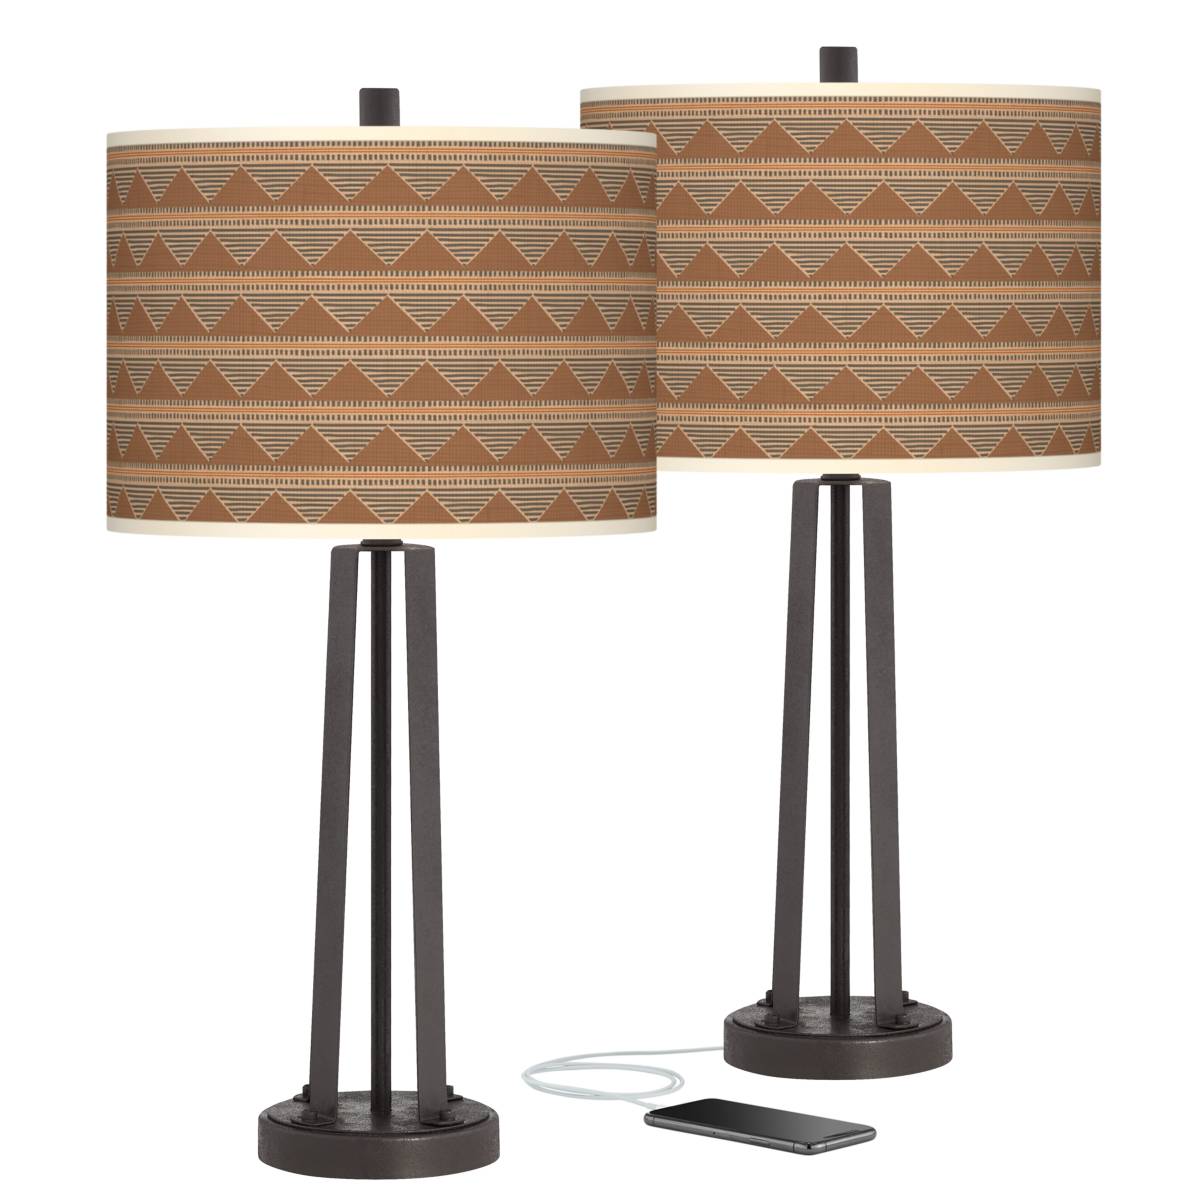 Lamp Sets, Bedroom, Table Lamps - Page 5 | Lamps Plus